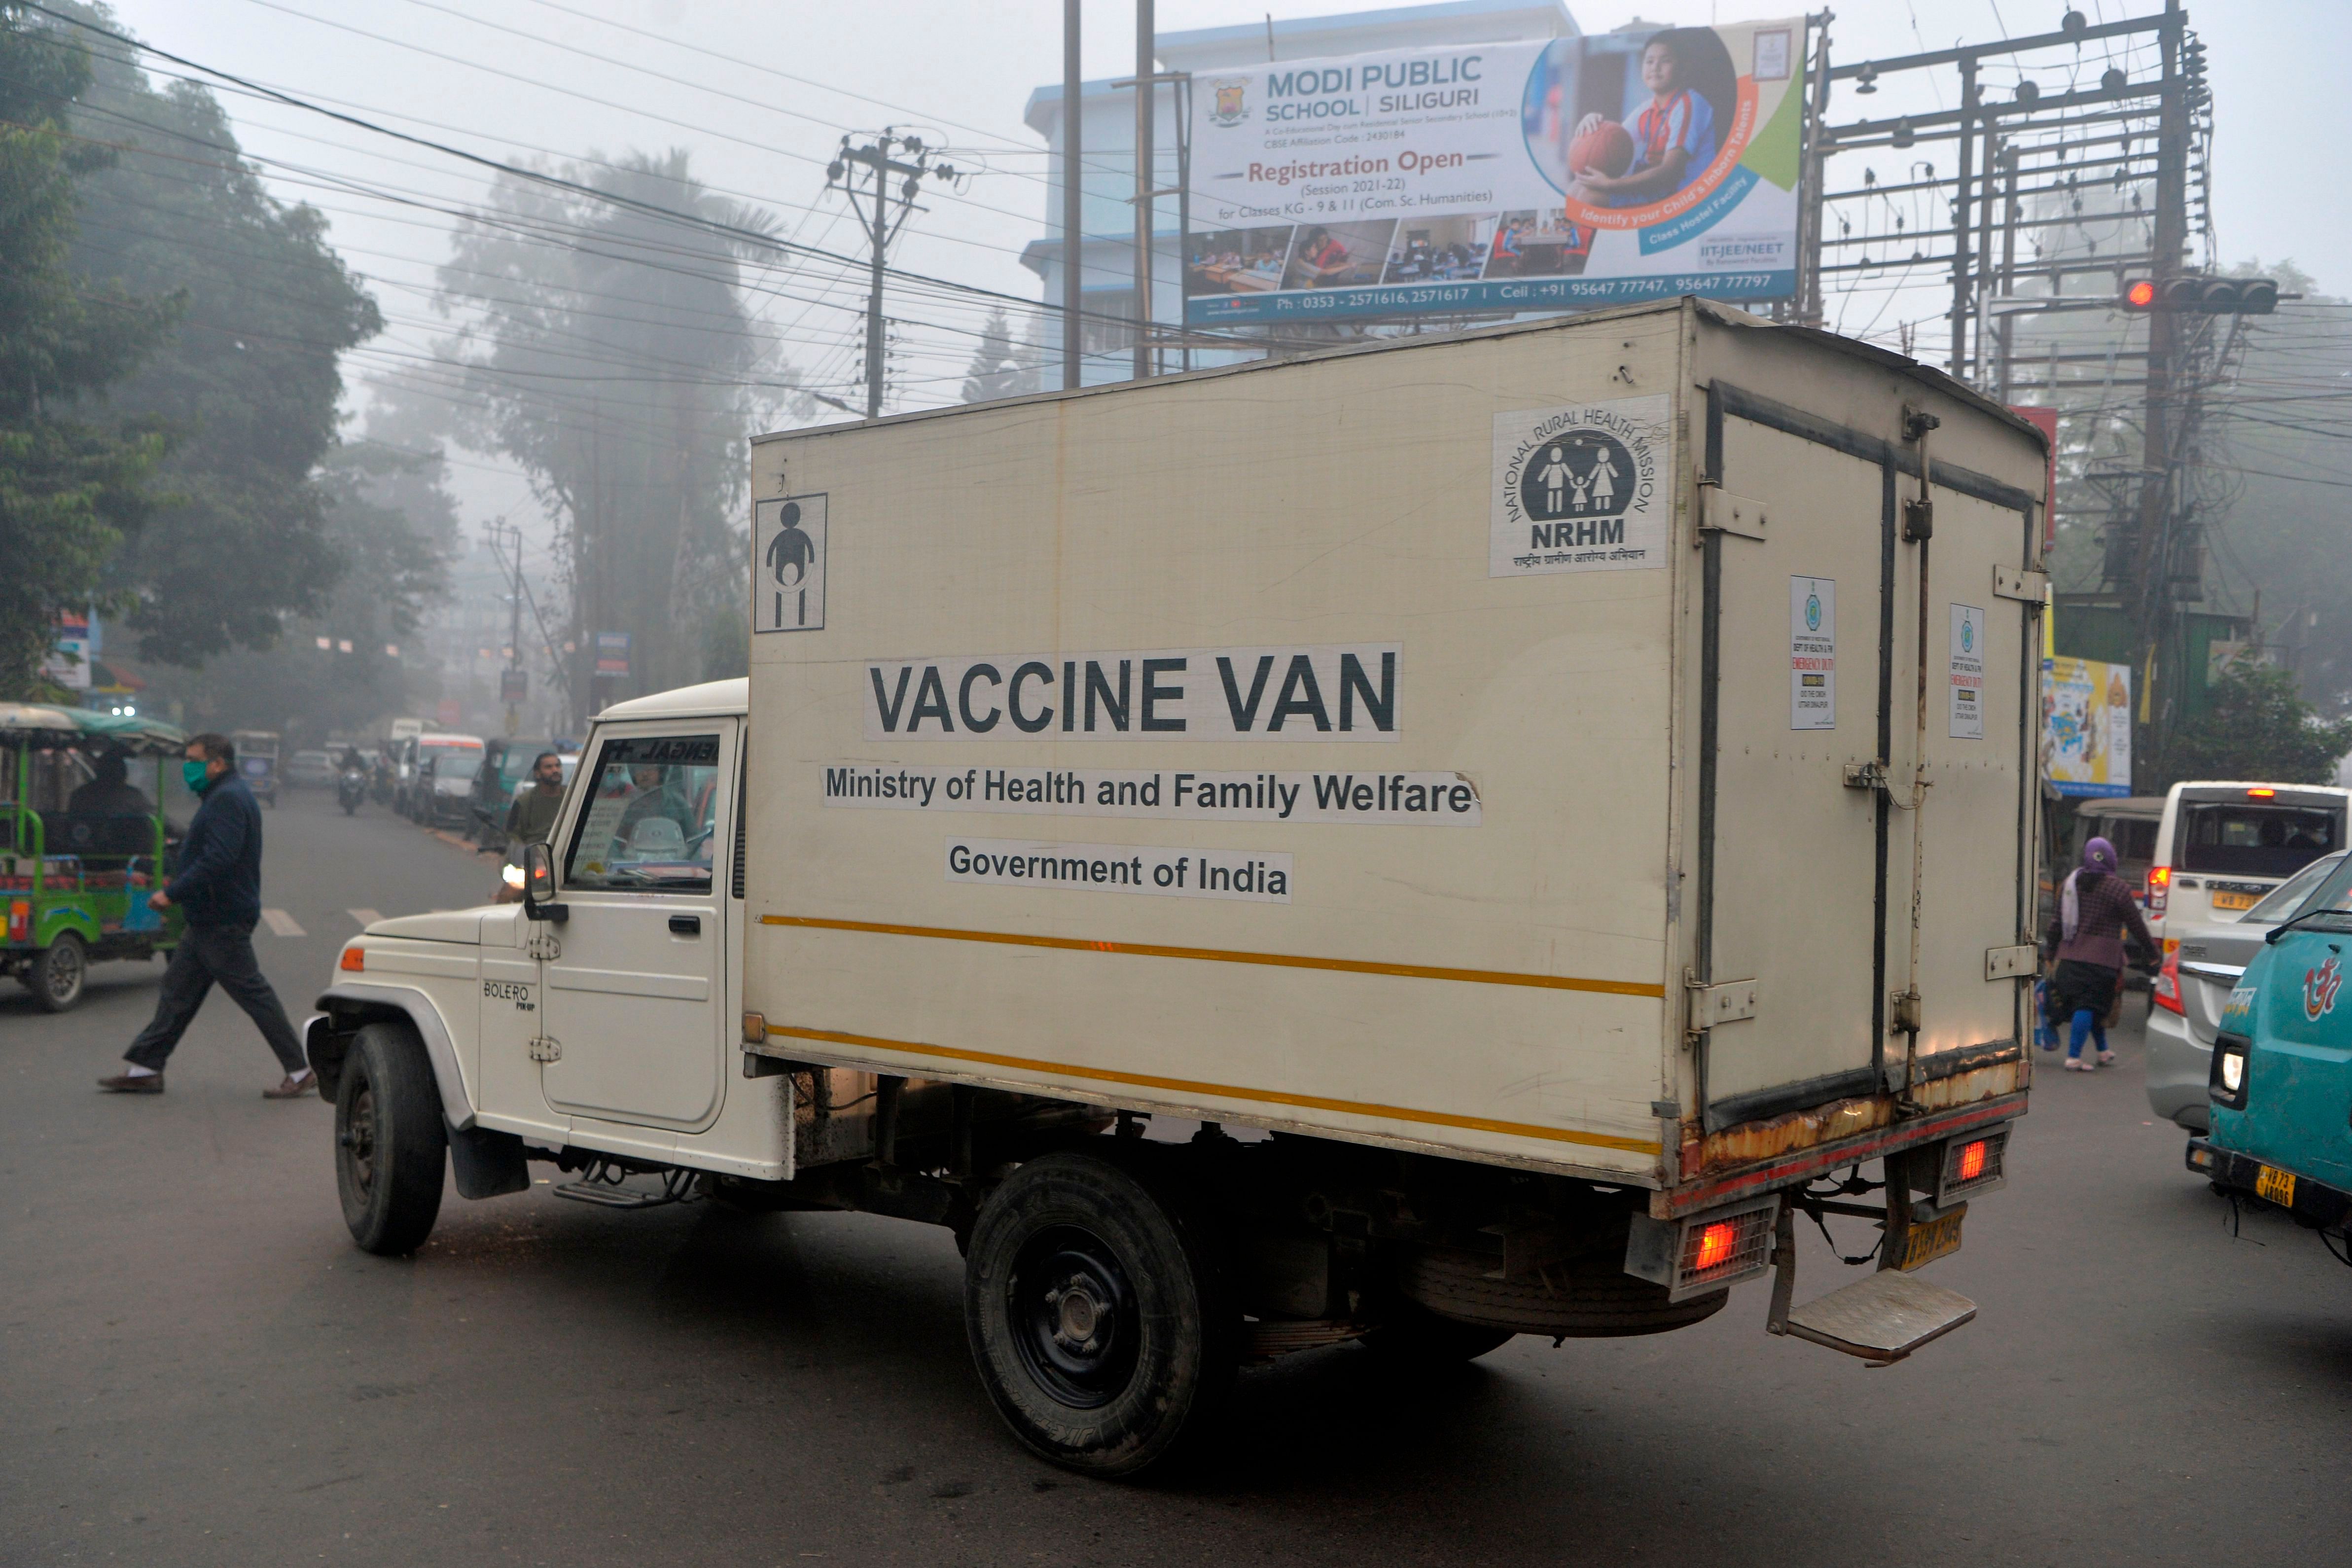 A van transports boxes of Covishield vaccine to different areas of the city in Siliguri on January 12, 2021. Credit: AFP File Photo